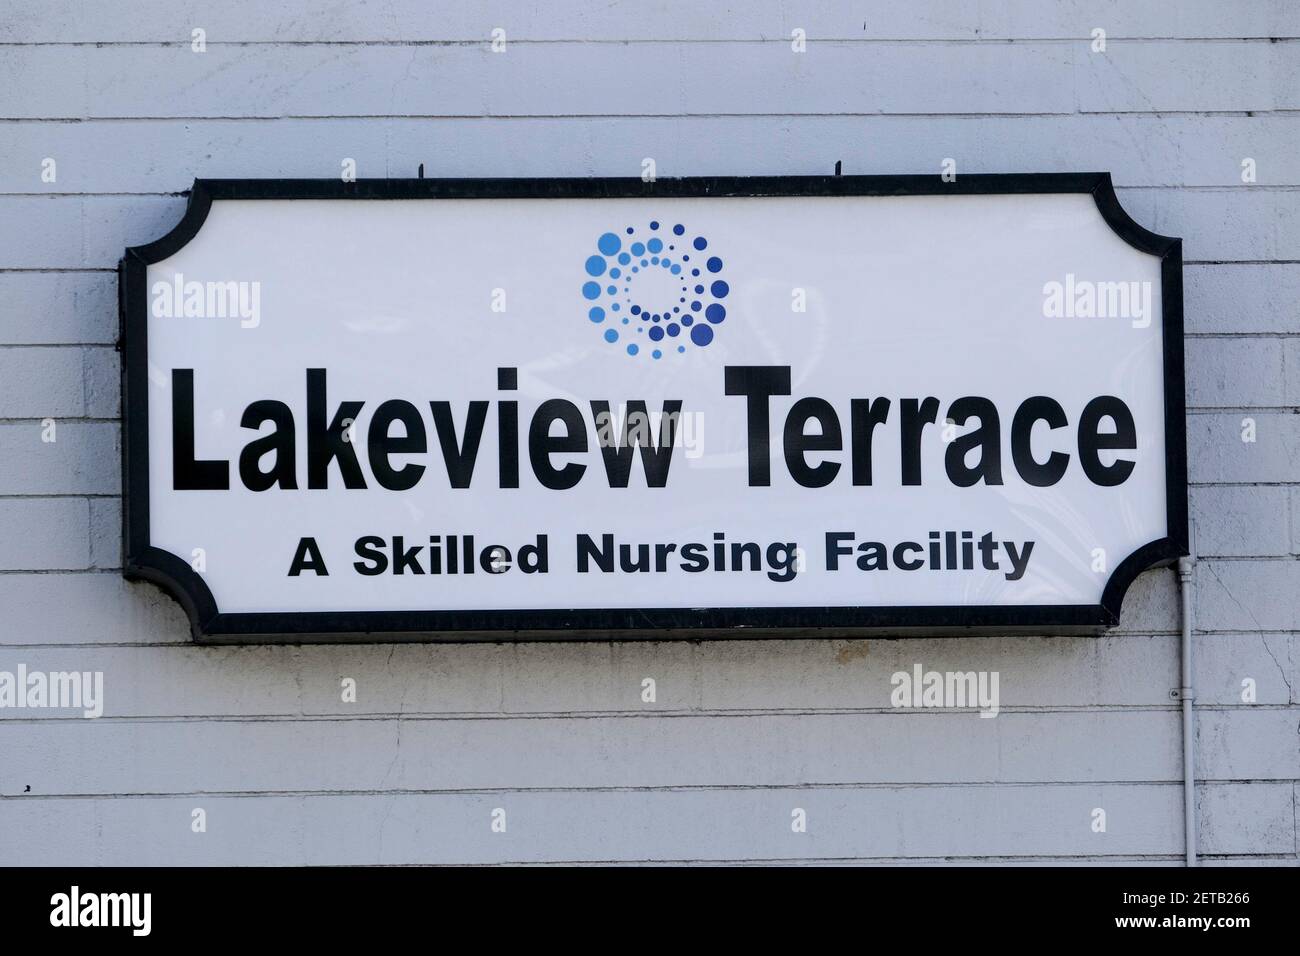 Los Angeles, California, USA. 1st Mar, 2021. A sign of Lakeview Terrace Skilled Nursing Facility in Los Angeles, March 1, 2021. Los Angeles City Attorney Mike Feuer announced today his office reached a settlement with Lakeview Terrace Skilled Nursing Facility, which was accused of patient dumping during the COVID-19 pandemic, as well as abuse, neglect, denial of care and efforts to conceal its conduct. Credit: Ringo Chiu/ZUMA Wire/Alamy Live News Stock Photo